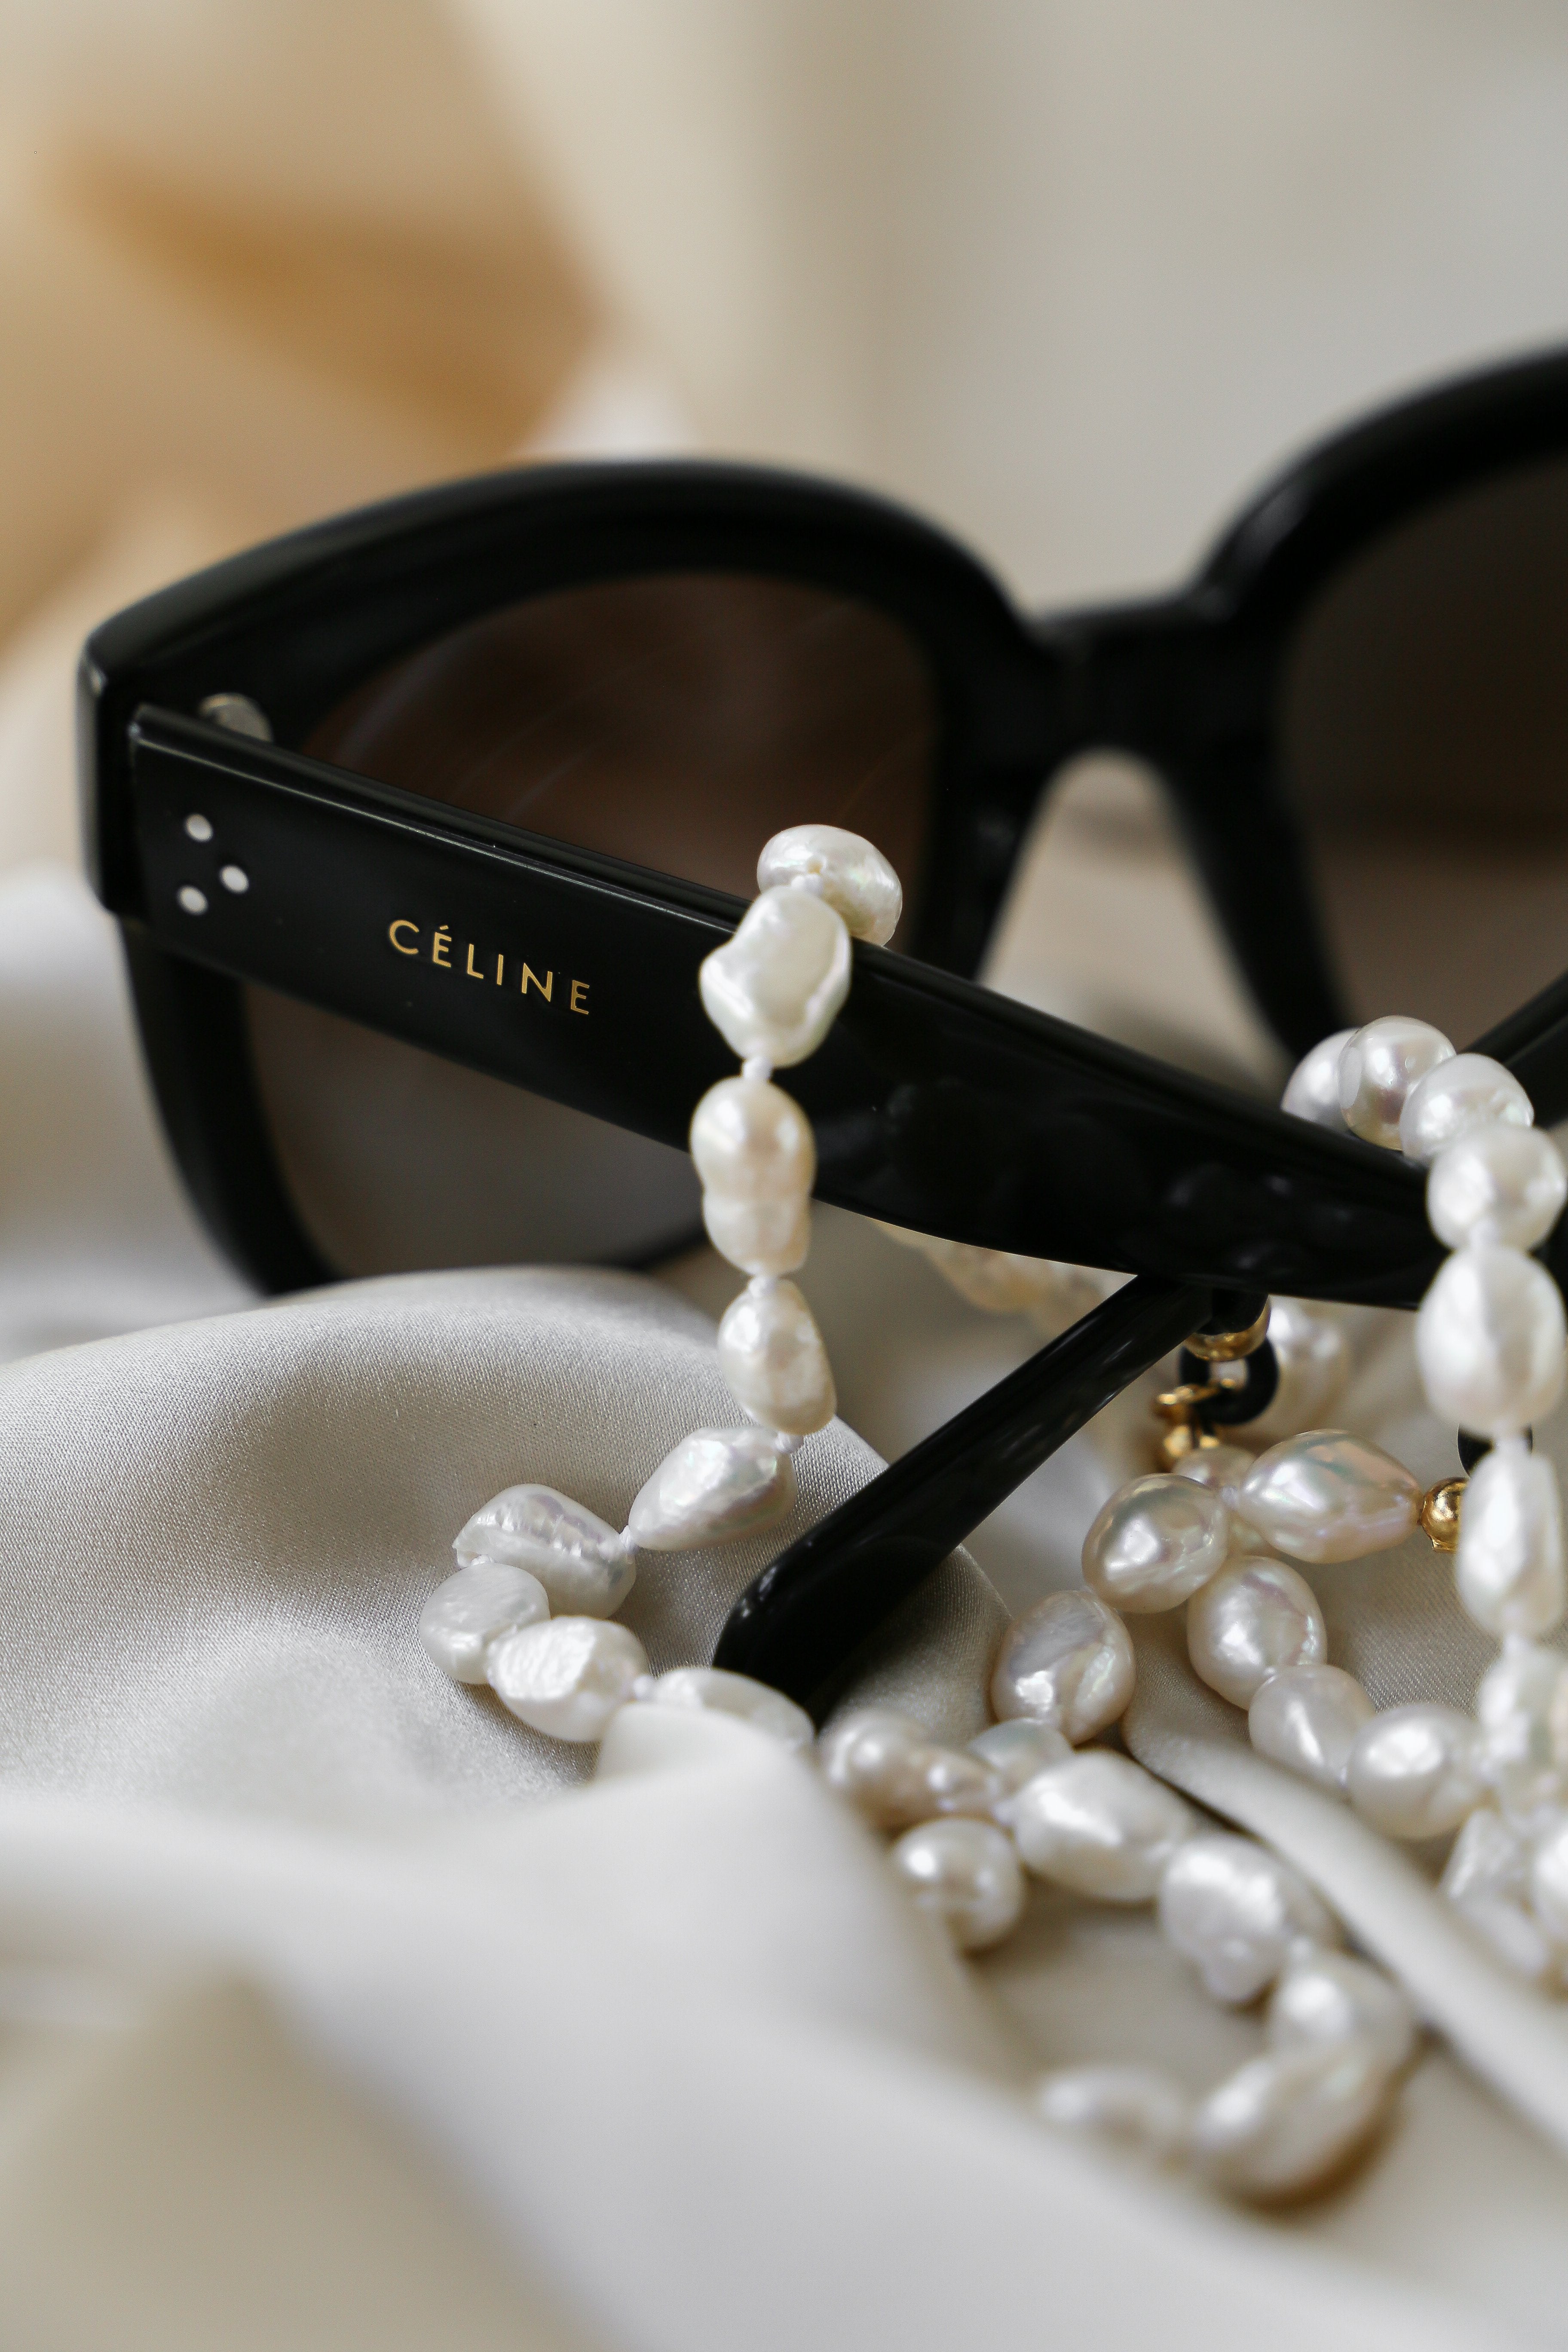 Fortuna Sunglasses Chain - Boutique Minimaliste has waterproof, durable, elegant and vintage inspired jewelry